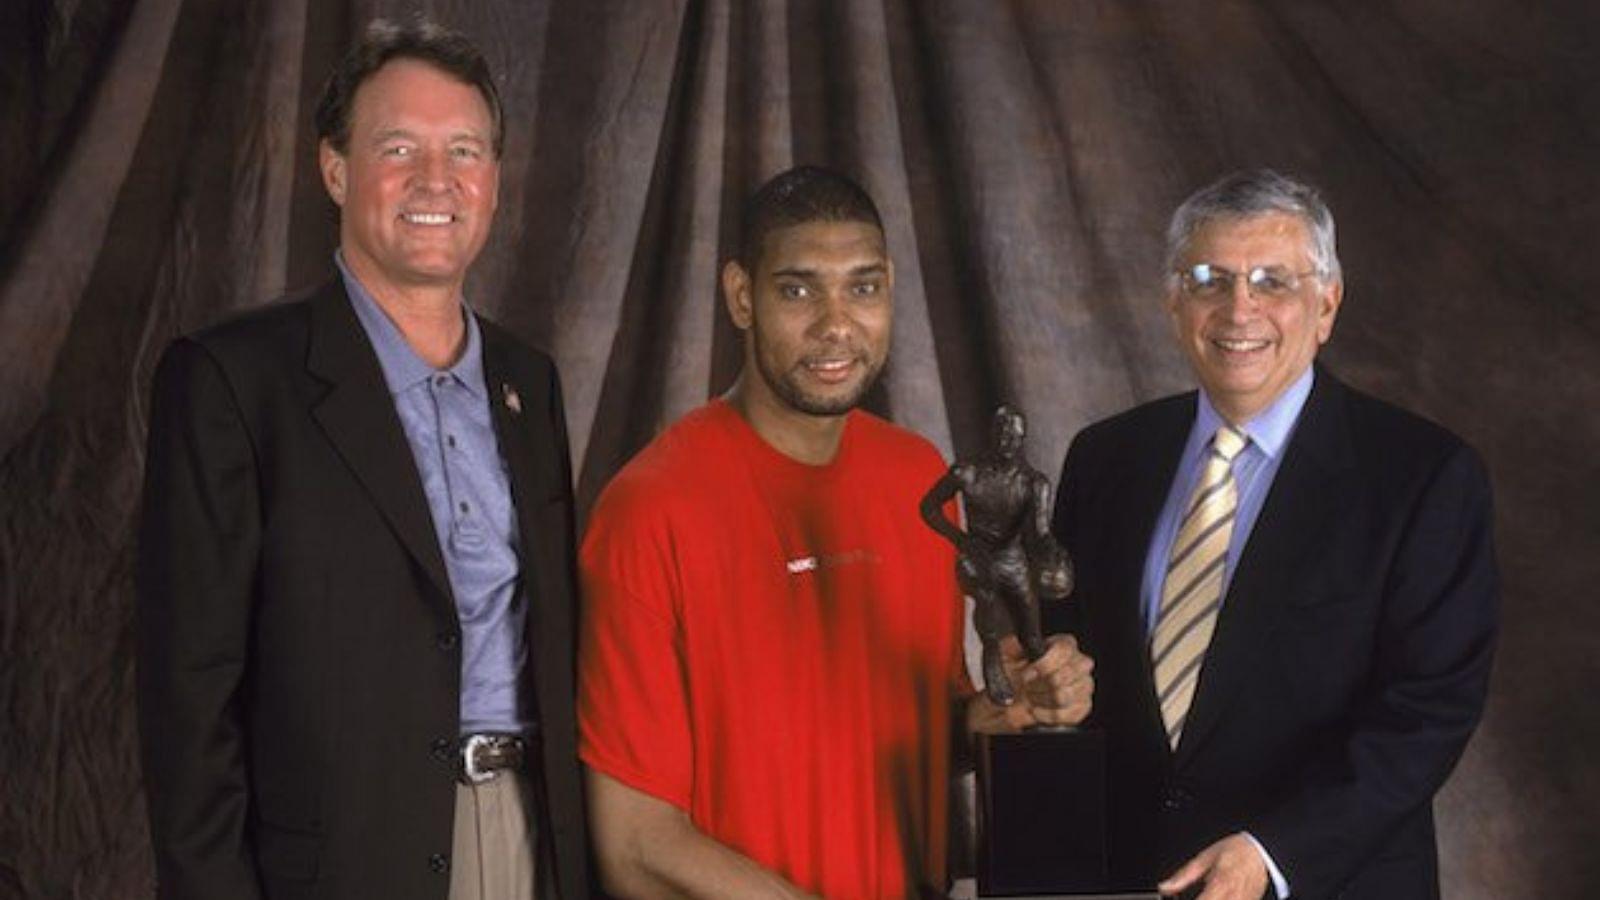 “If we win, I am happy, the rest of it is just stuff”: Tim Duncan despite his 6ft 11” frame and immaculate basketball skills was a simple man who wanted wins more than MVPs